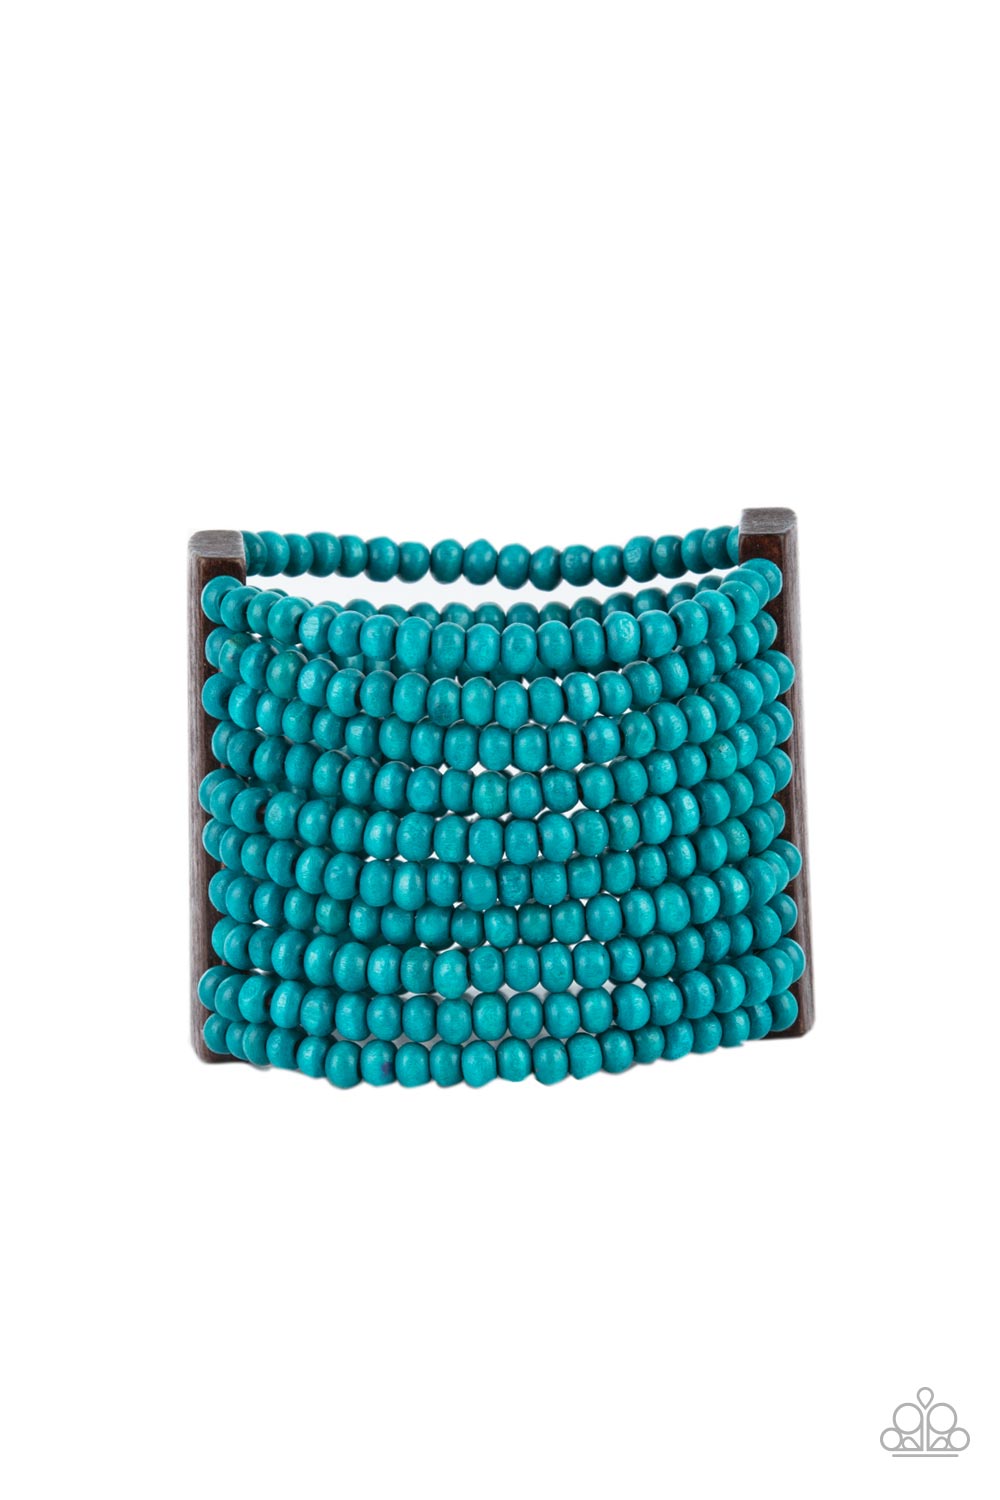 Paparazzi Waikiki Wonderland - Blue Wood Bracelets held together with brown wooden rectangular frames, rows of refreshing blue wooden beads are threaded along stretchy bands around the wrist for a whimsically layered look.  Sold as one individual bracelet.